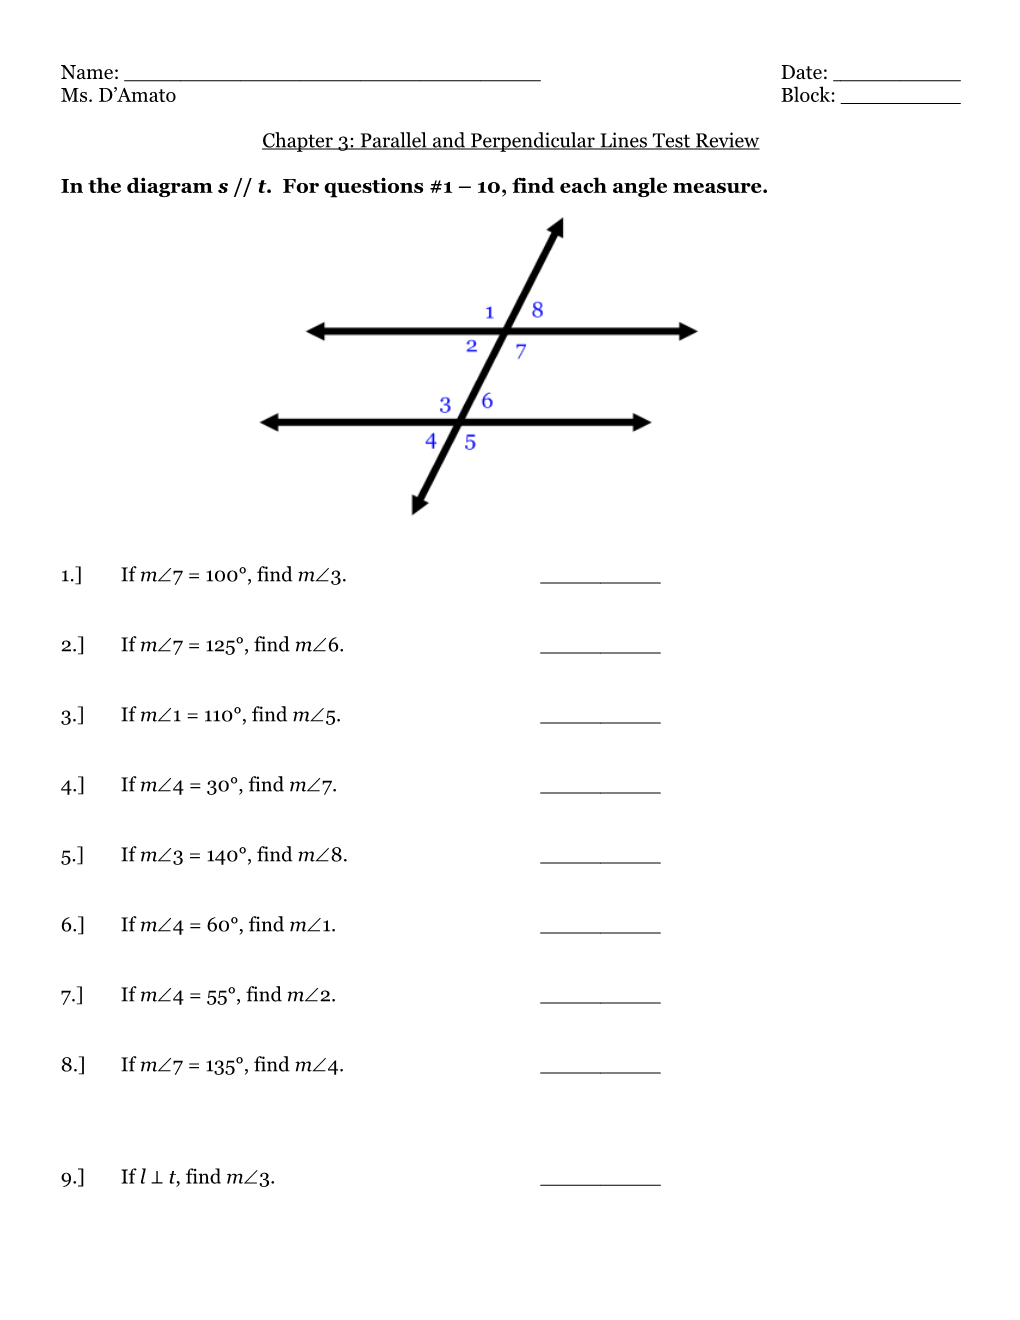 Chapter 3: Parallel and Perpendicular Lines Test Review